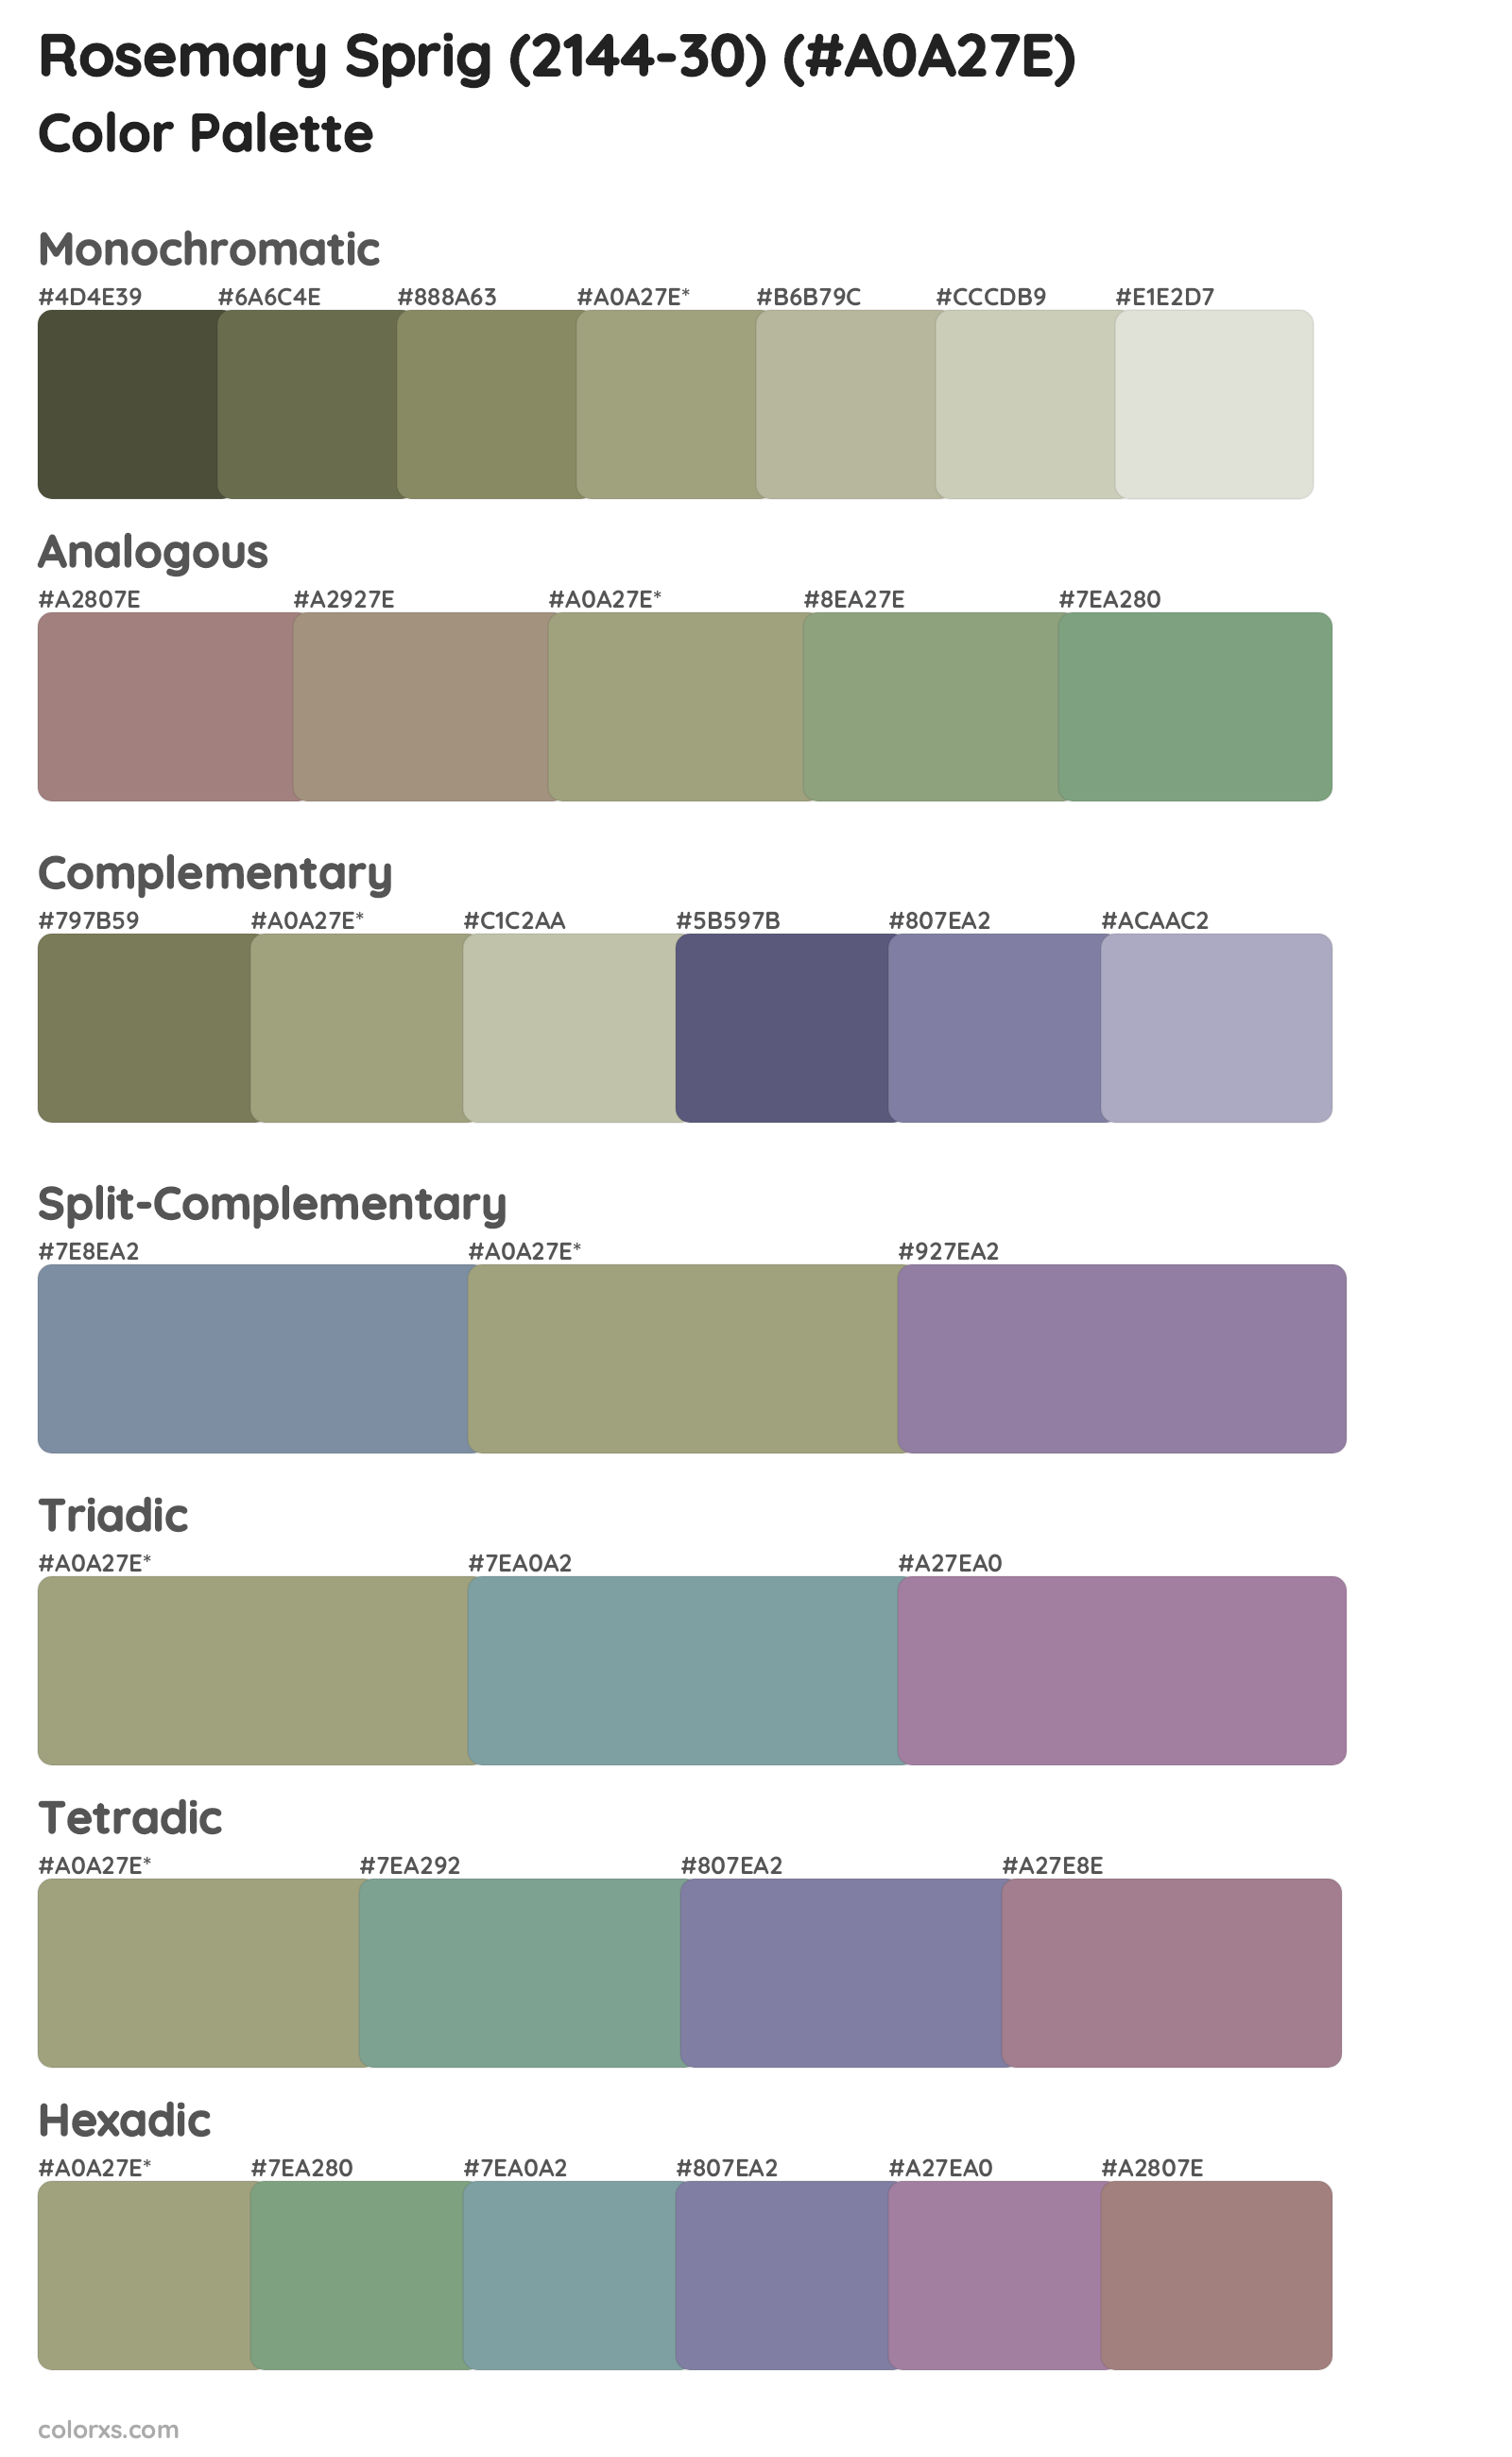 Rosemary Sprig (2144-30) Color Scheme Palettes